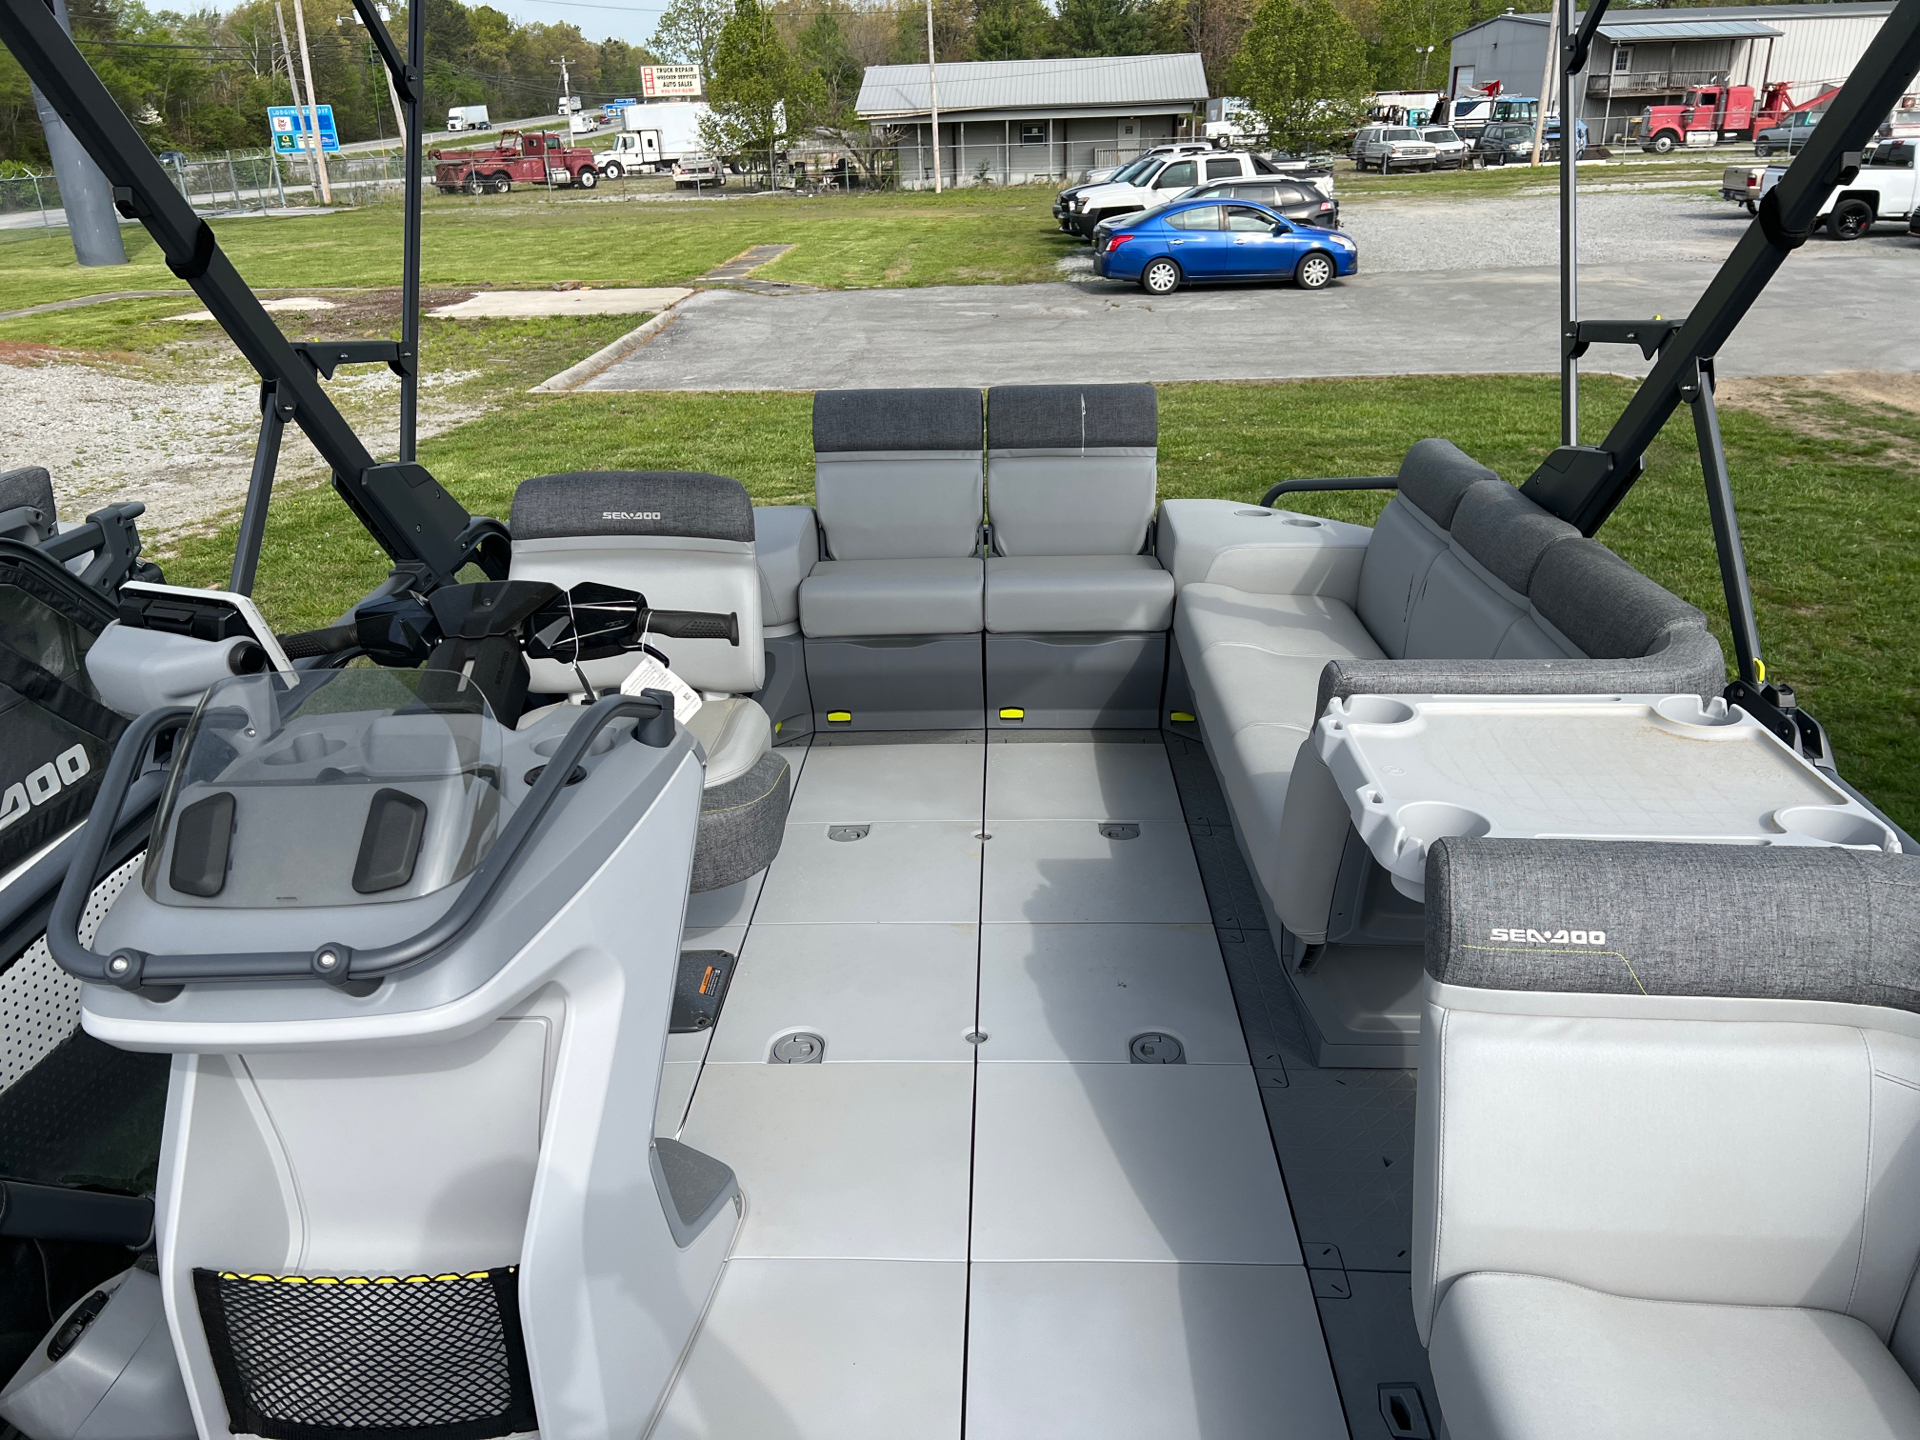 2023 Sea-Doo Switch Cruise 21 - 230 HP in Crossville, Tennessee - Photo 4